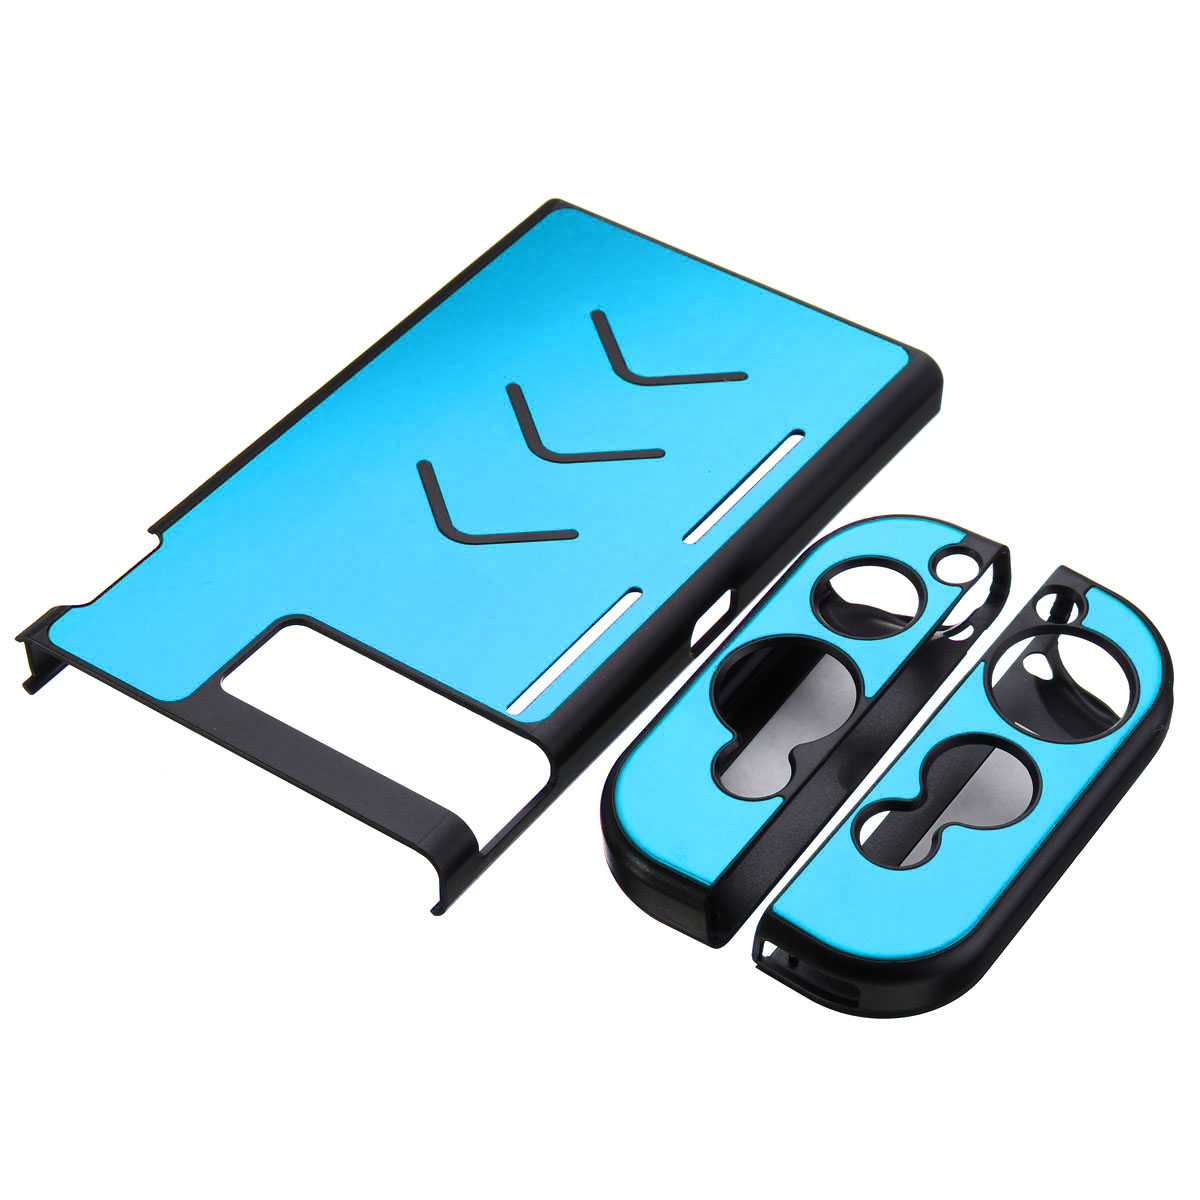 Protective-PC-Shell-for-Nintendo-Switch-Game-Console-JoyPad-Anti-drop-Anti-scratch--Aluminum-Sheet-C-1952581-10